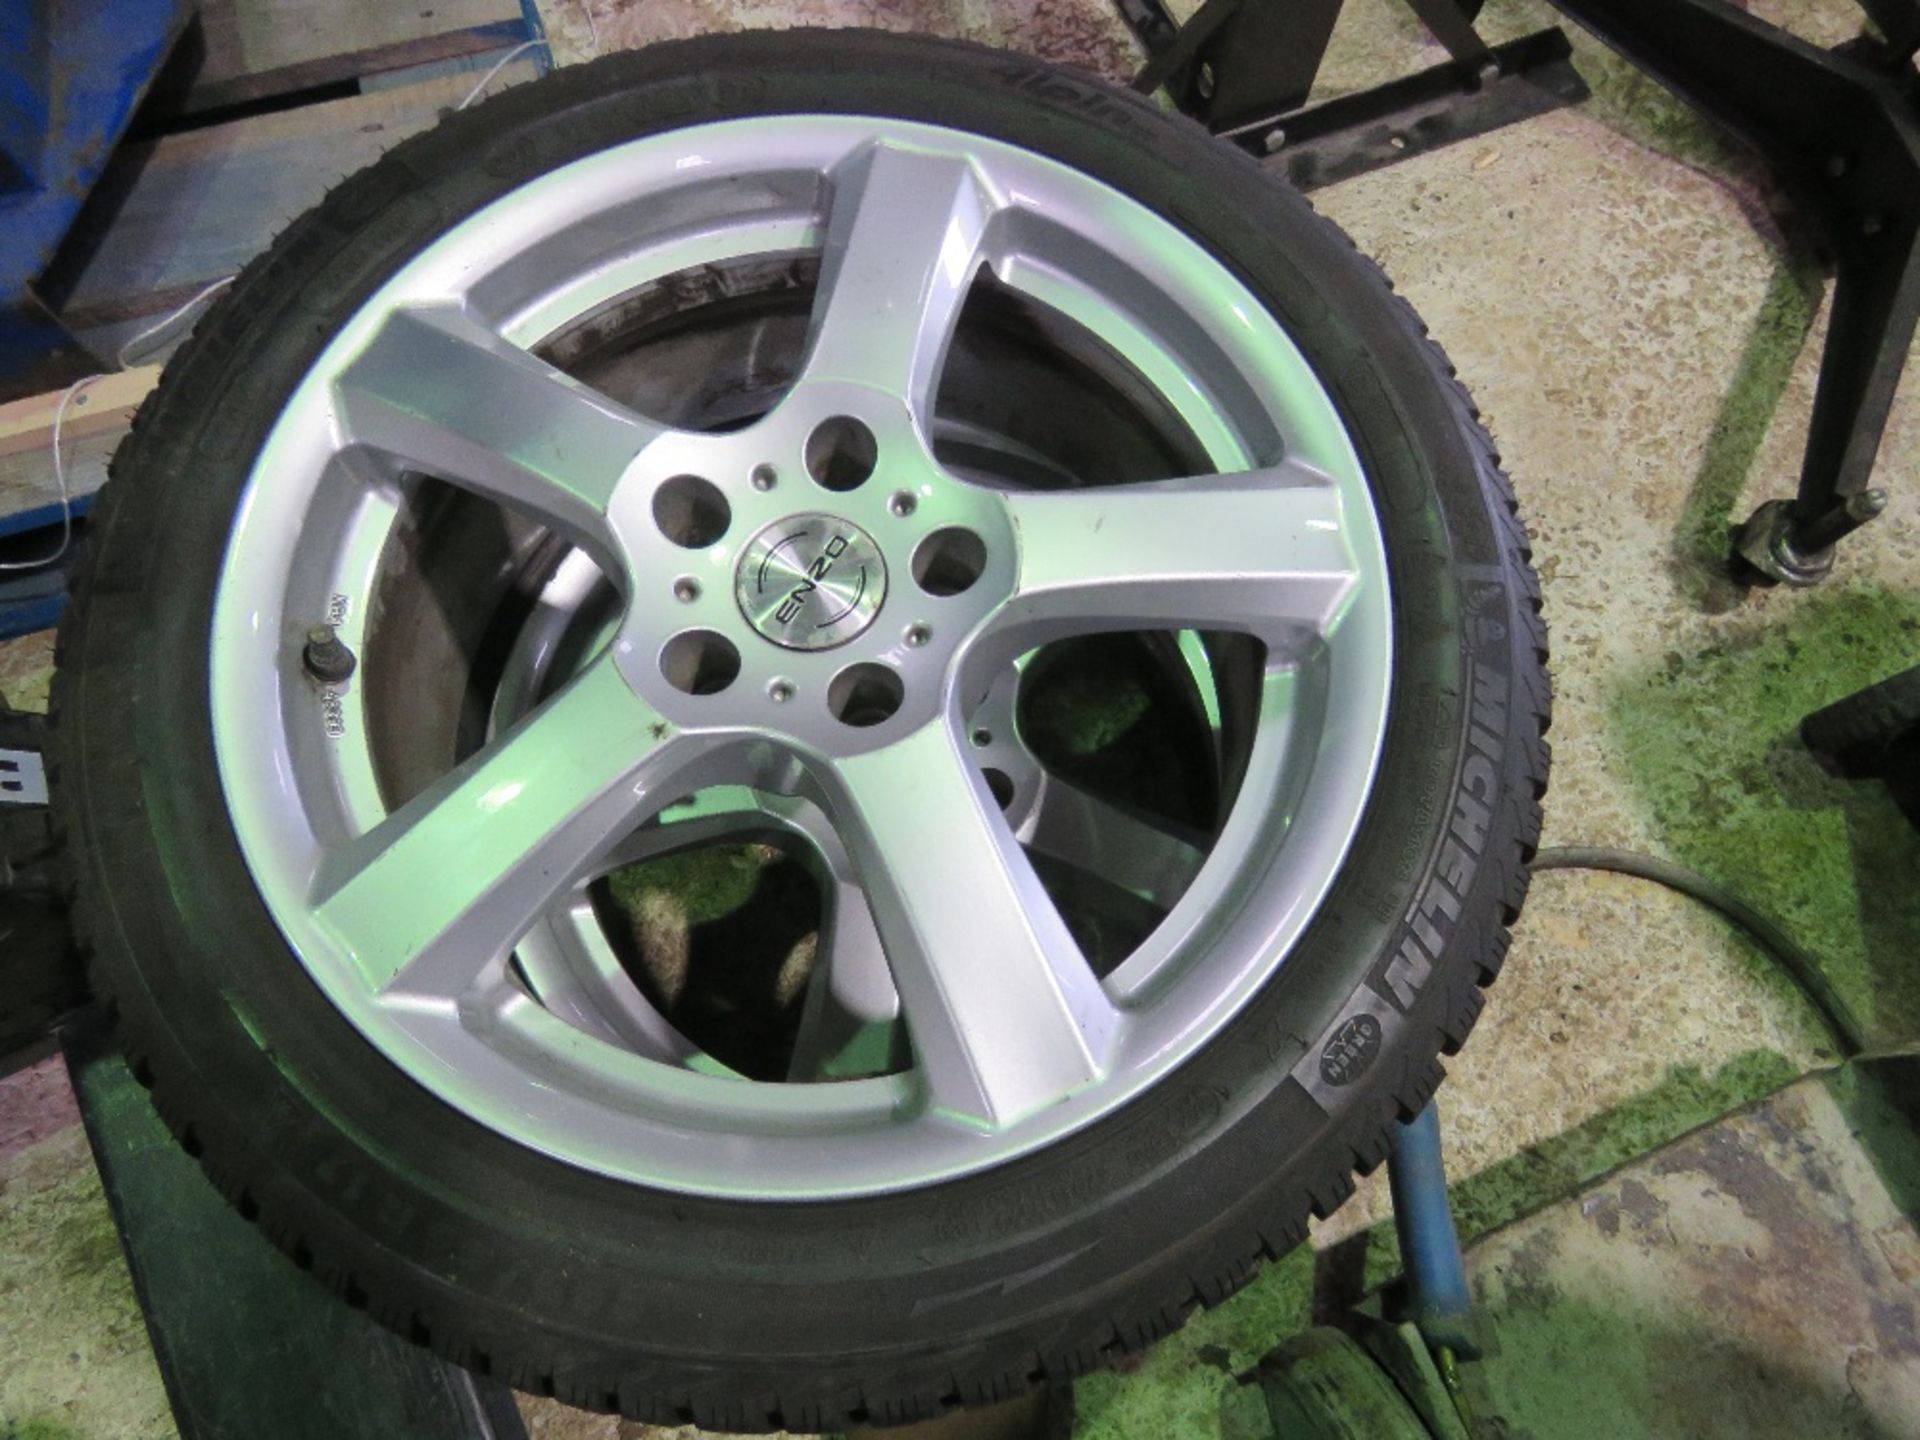 SET OF 4NO ENZO 225-45/17 ALLOY WHEELS AND TYRES, SNOW / WINTER TYRES FITTED. - Image 8 of 9